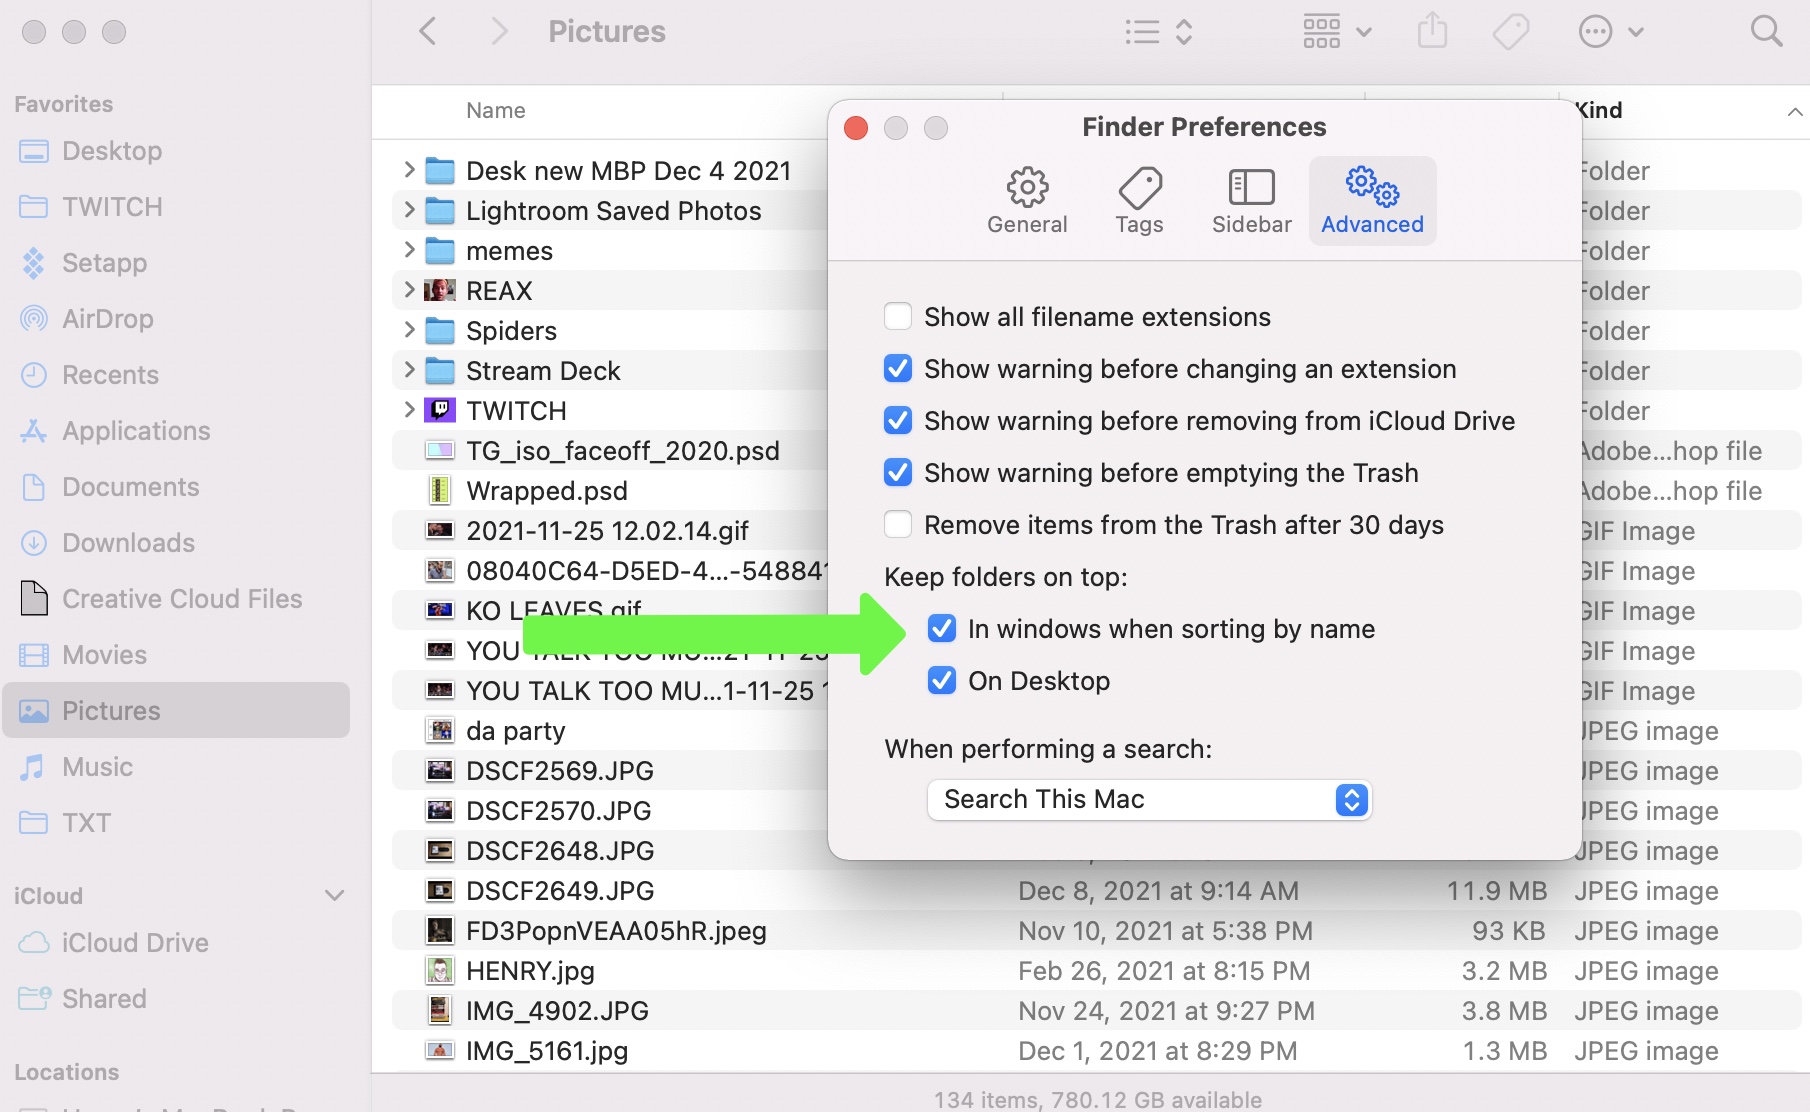 The Finder Preferences on my MacBook Pro